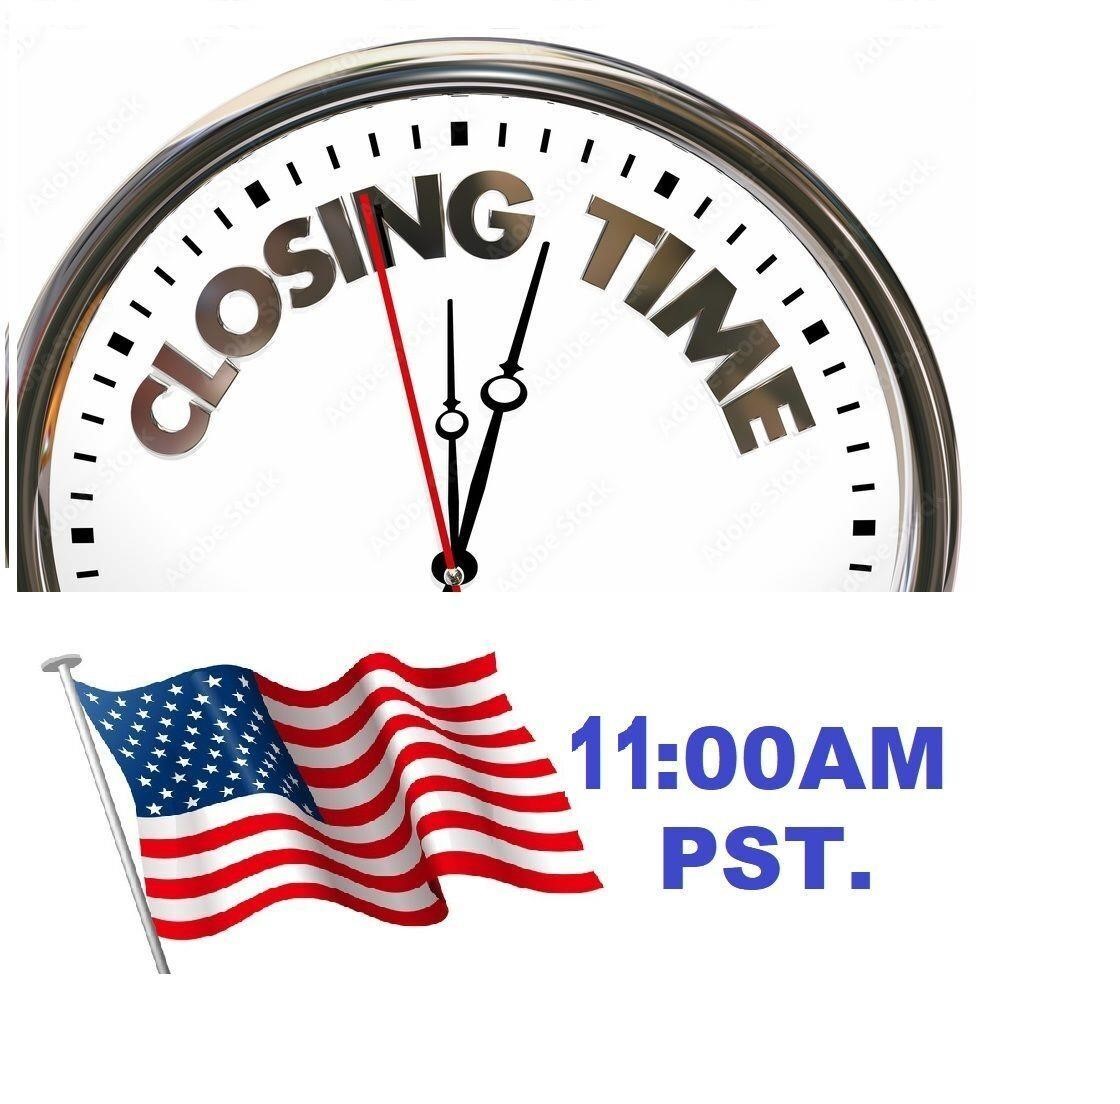 USA - AUCTION CLOSING TIME - 11:00AM